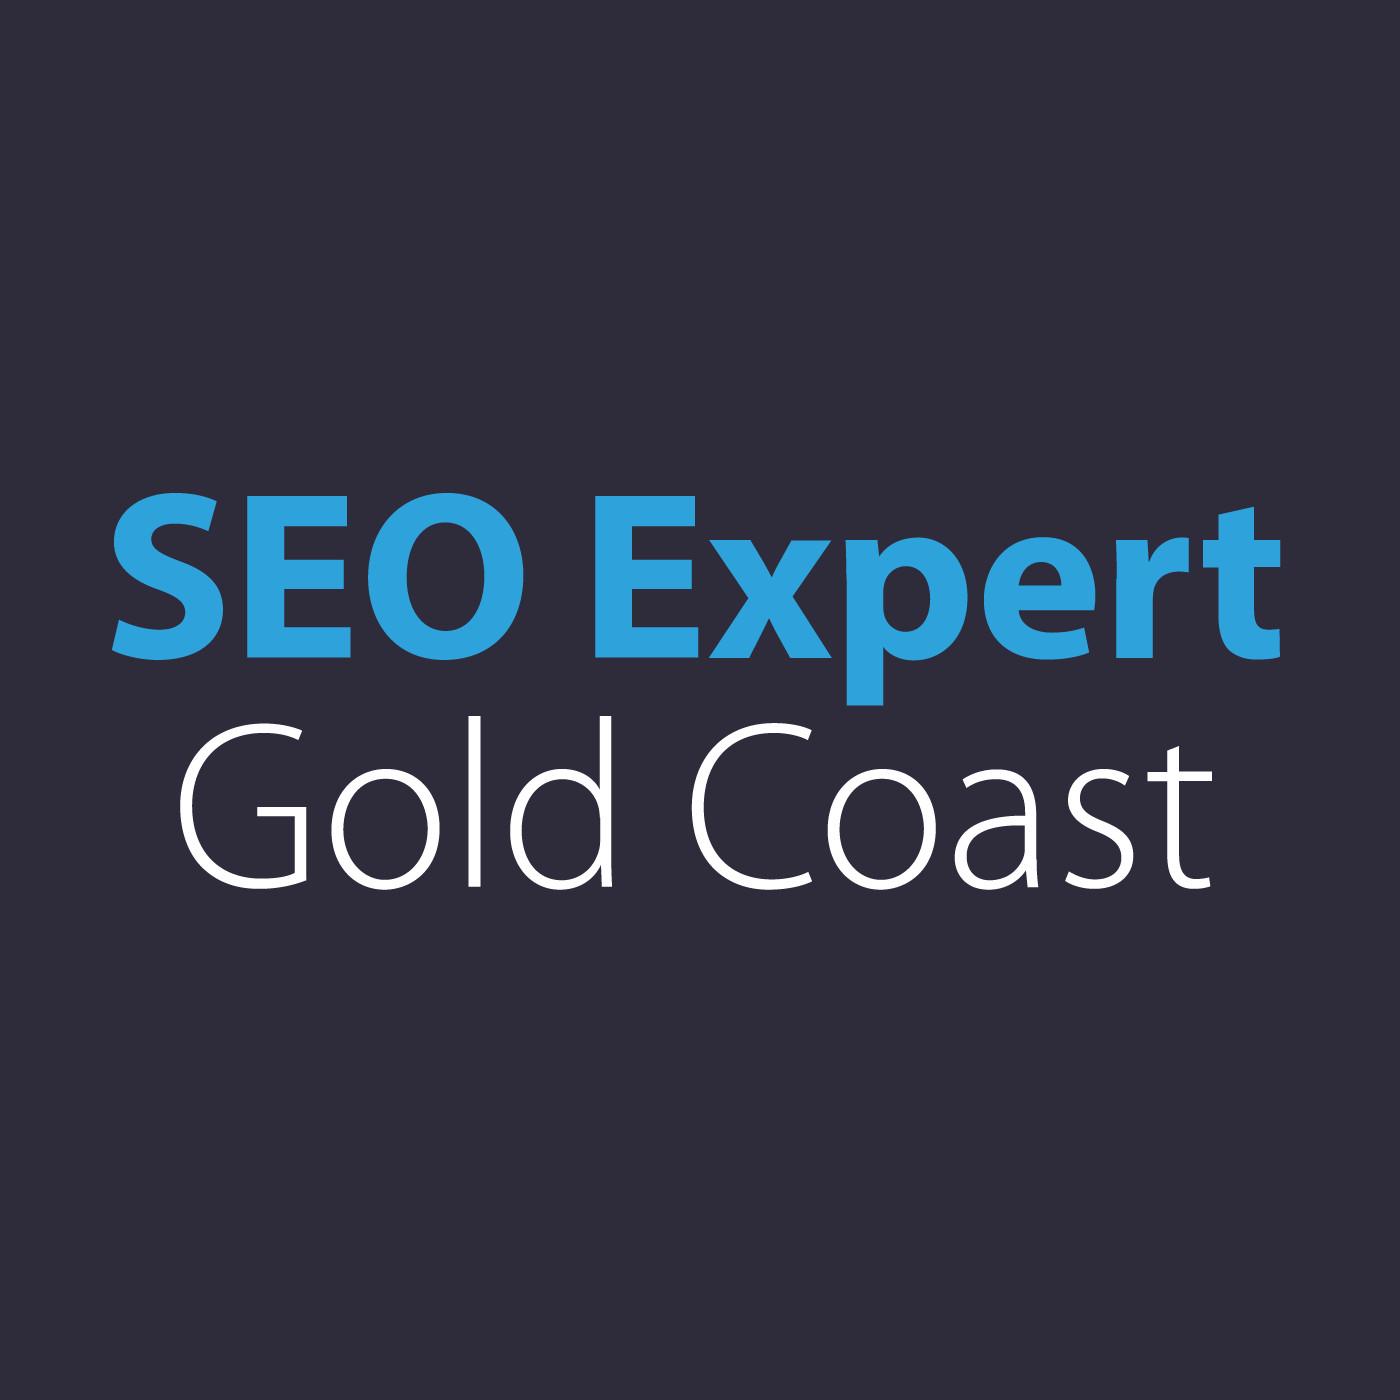 SEO Expert Gold Coast profile on Qualified.One